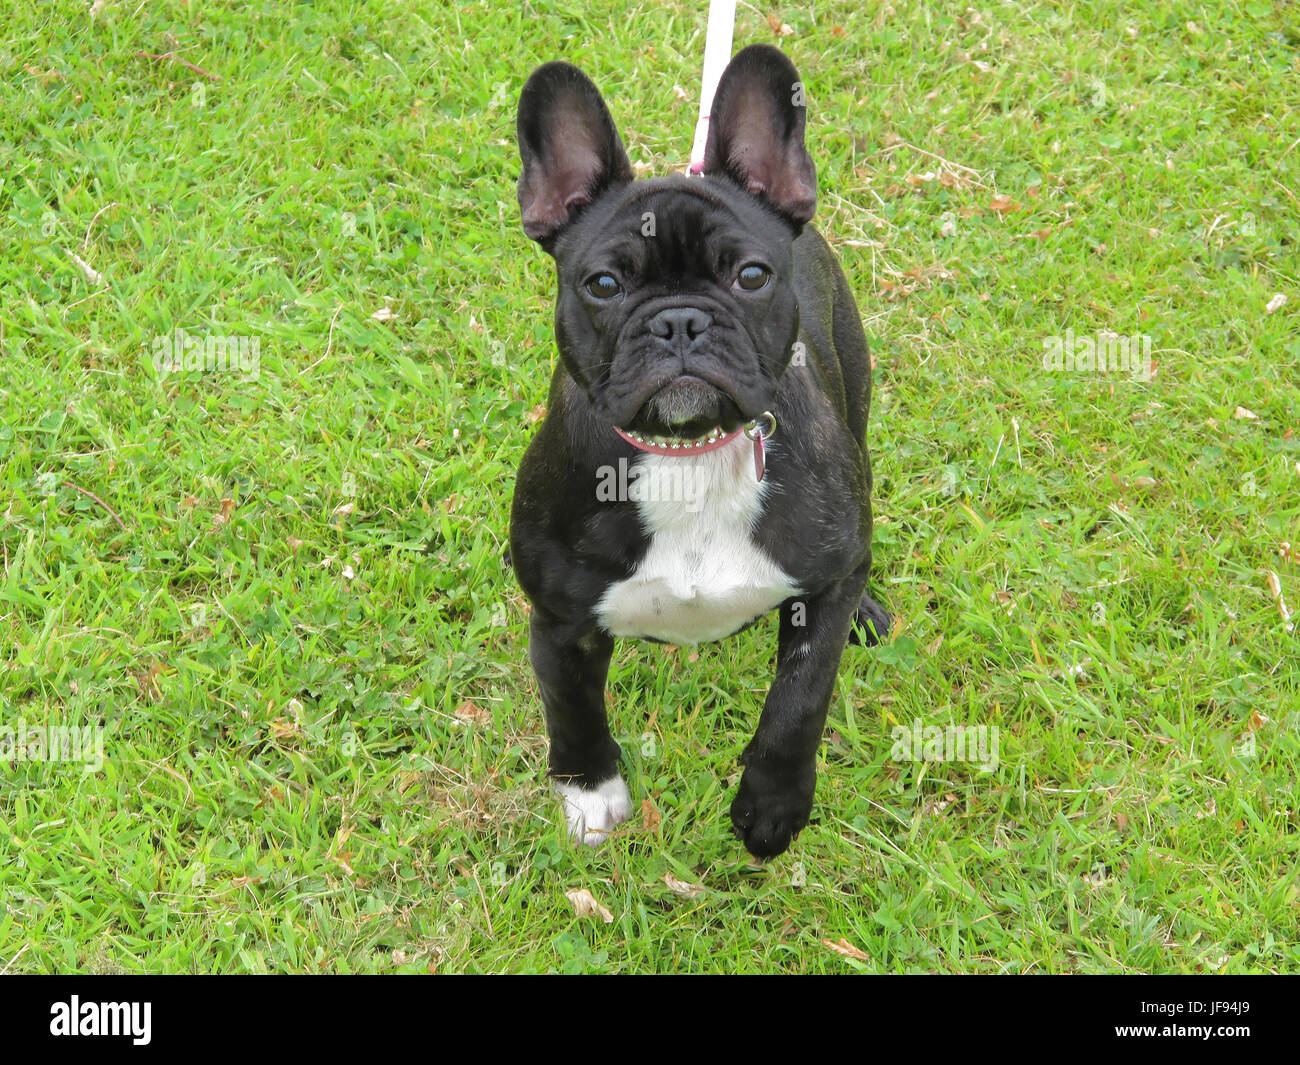 French Bulldog Dog Breed Picture tearing up black noir green grass background #FrenchBulldog Stock Photo